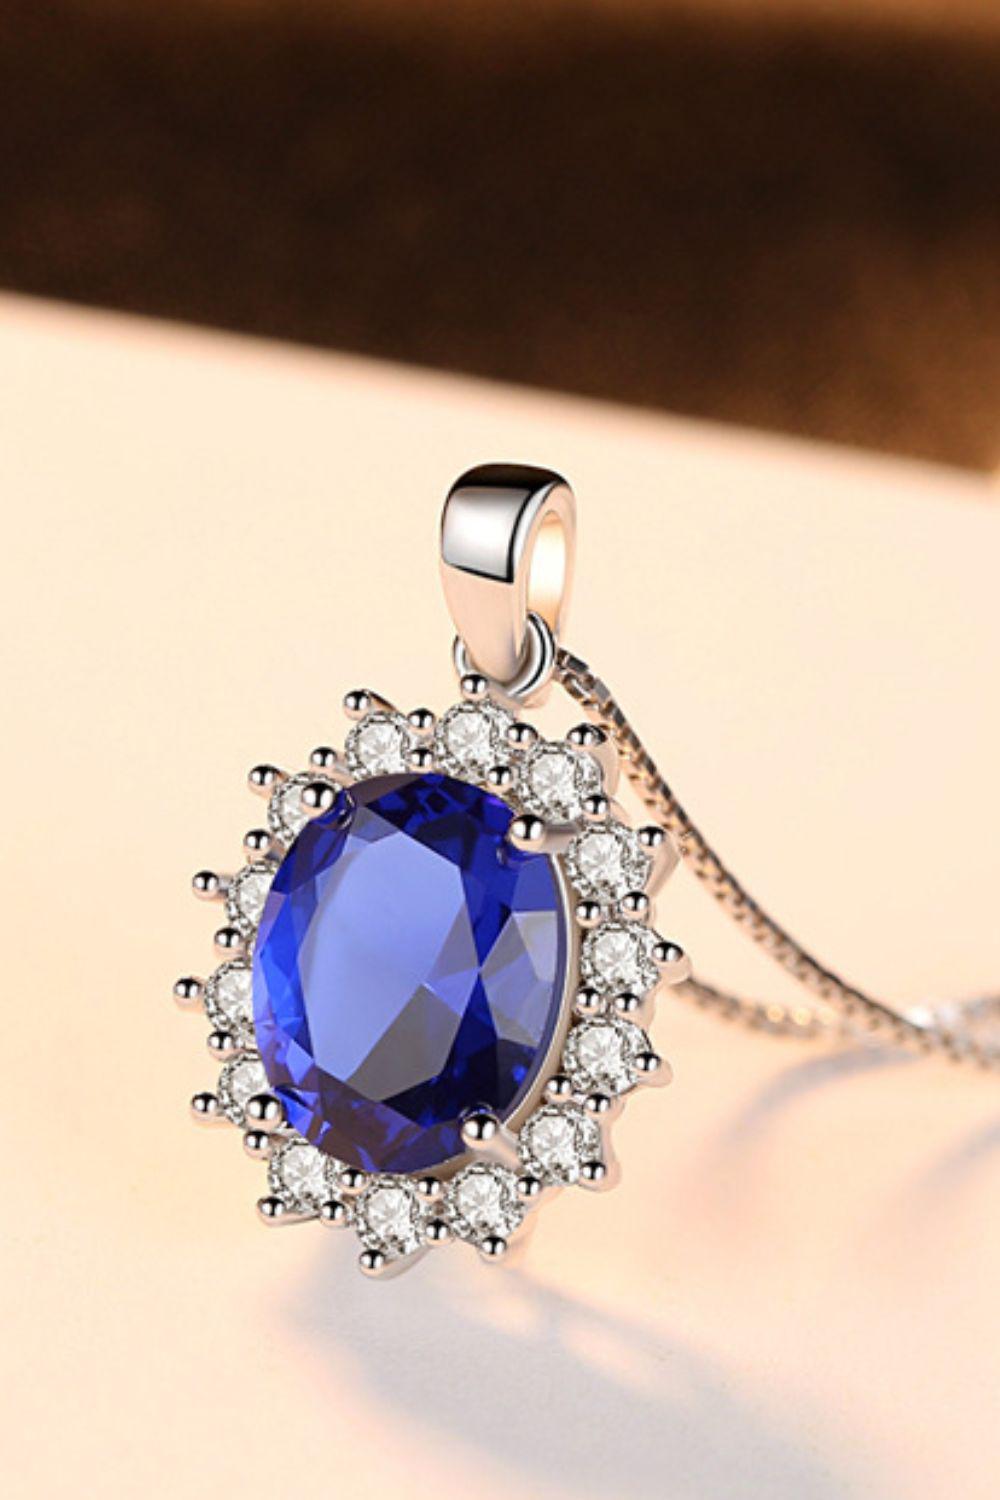 Synthetic Sapphire Pendant 925 Sterling Silver Necklace BLUE ZONE PLANET